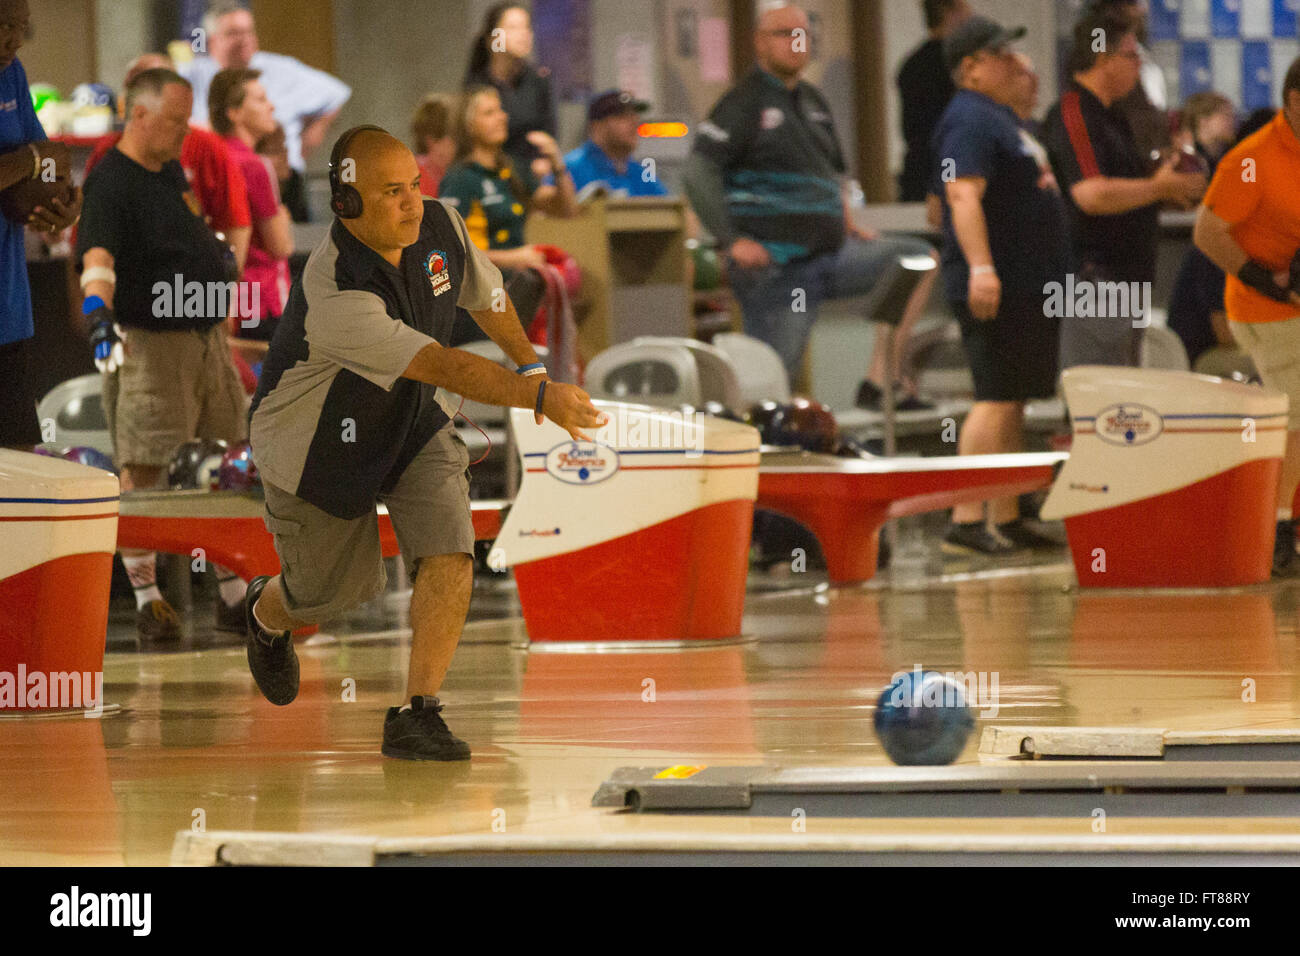 CBP Officer Hector Arredondo from the Sumas Washington Port of Entry goes for a srike at the World Police and Fire Games Bowling Tournament in Sterling Virginia. Photo by James Tourtellotte Stock Photo